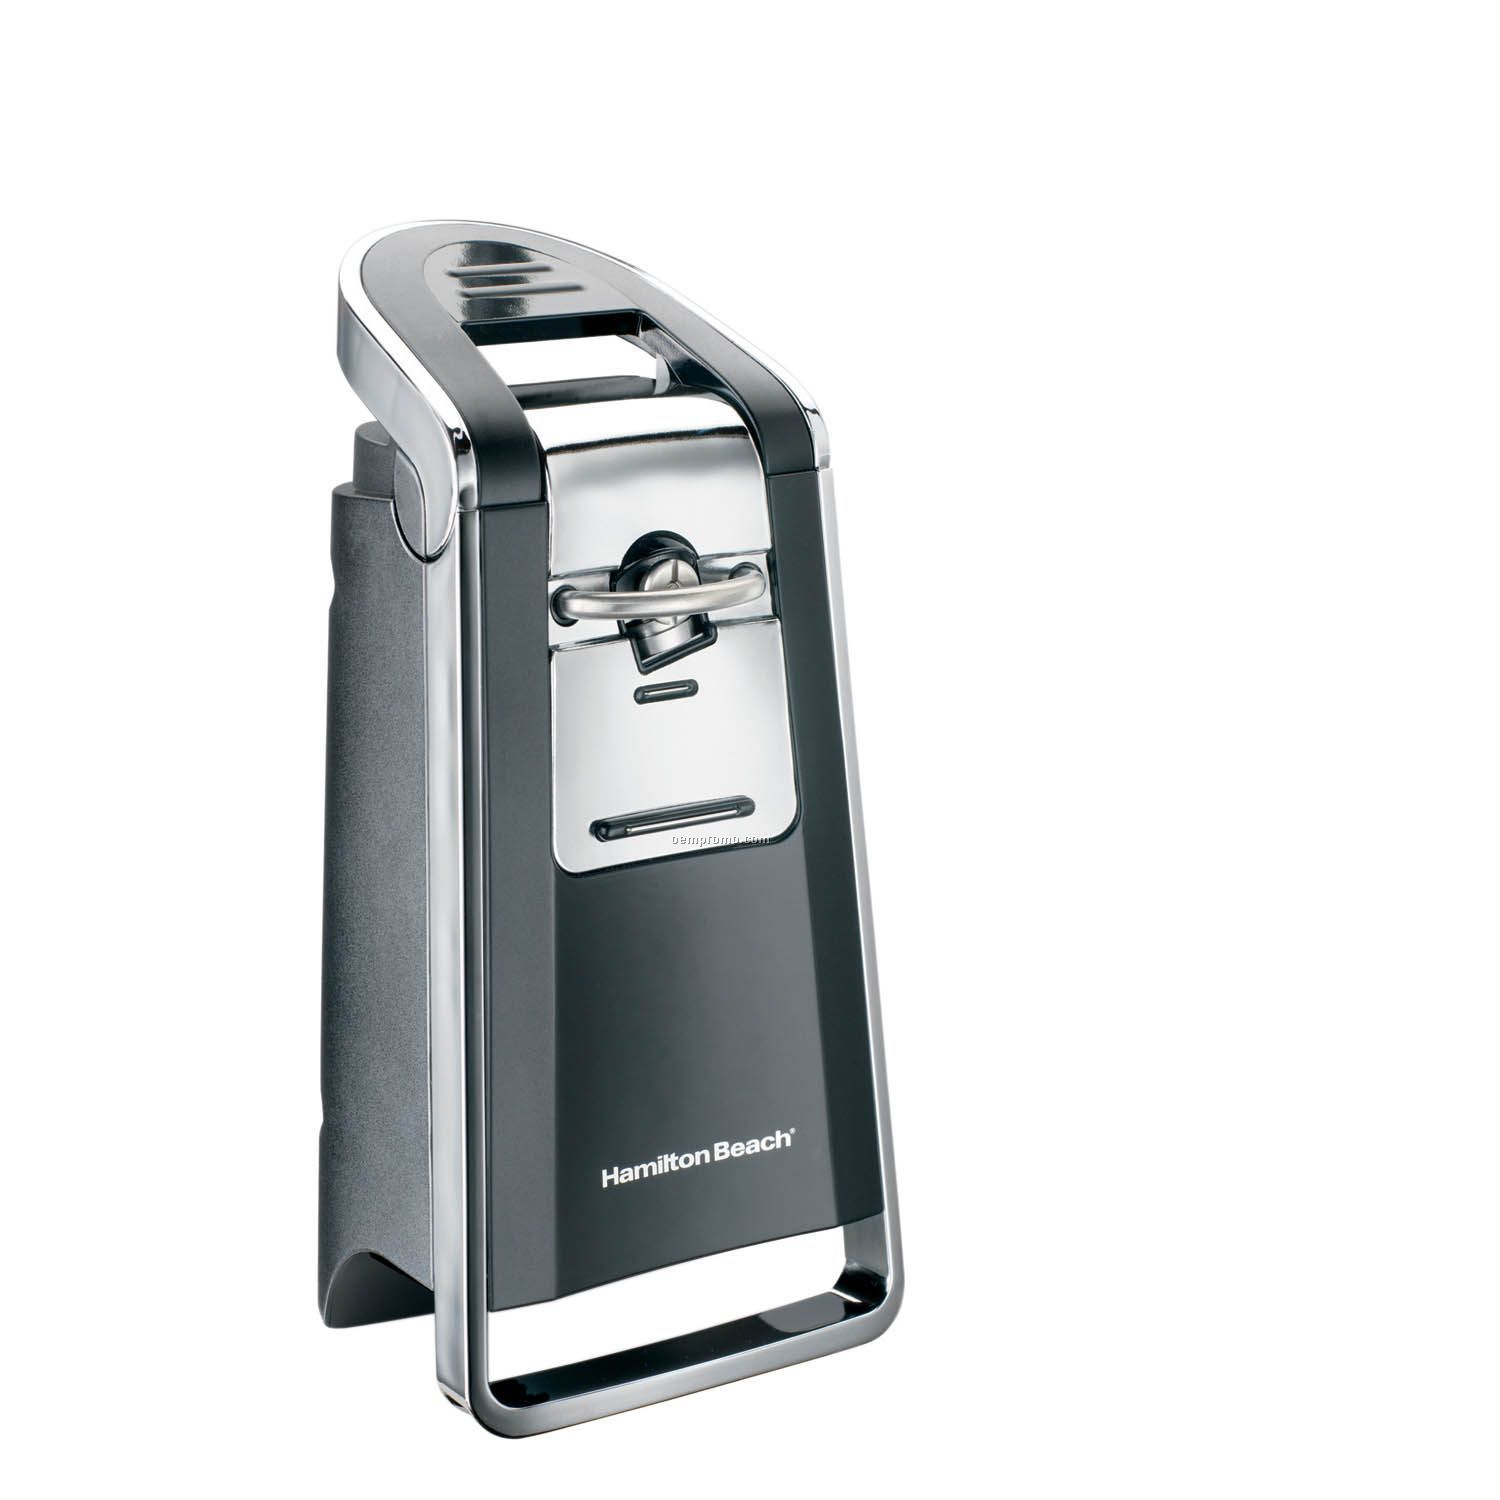 Hamilton Beach Smooth Touch Can Opener (Black)